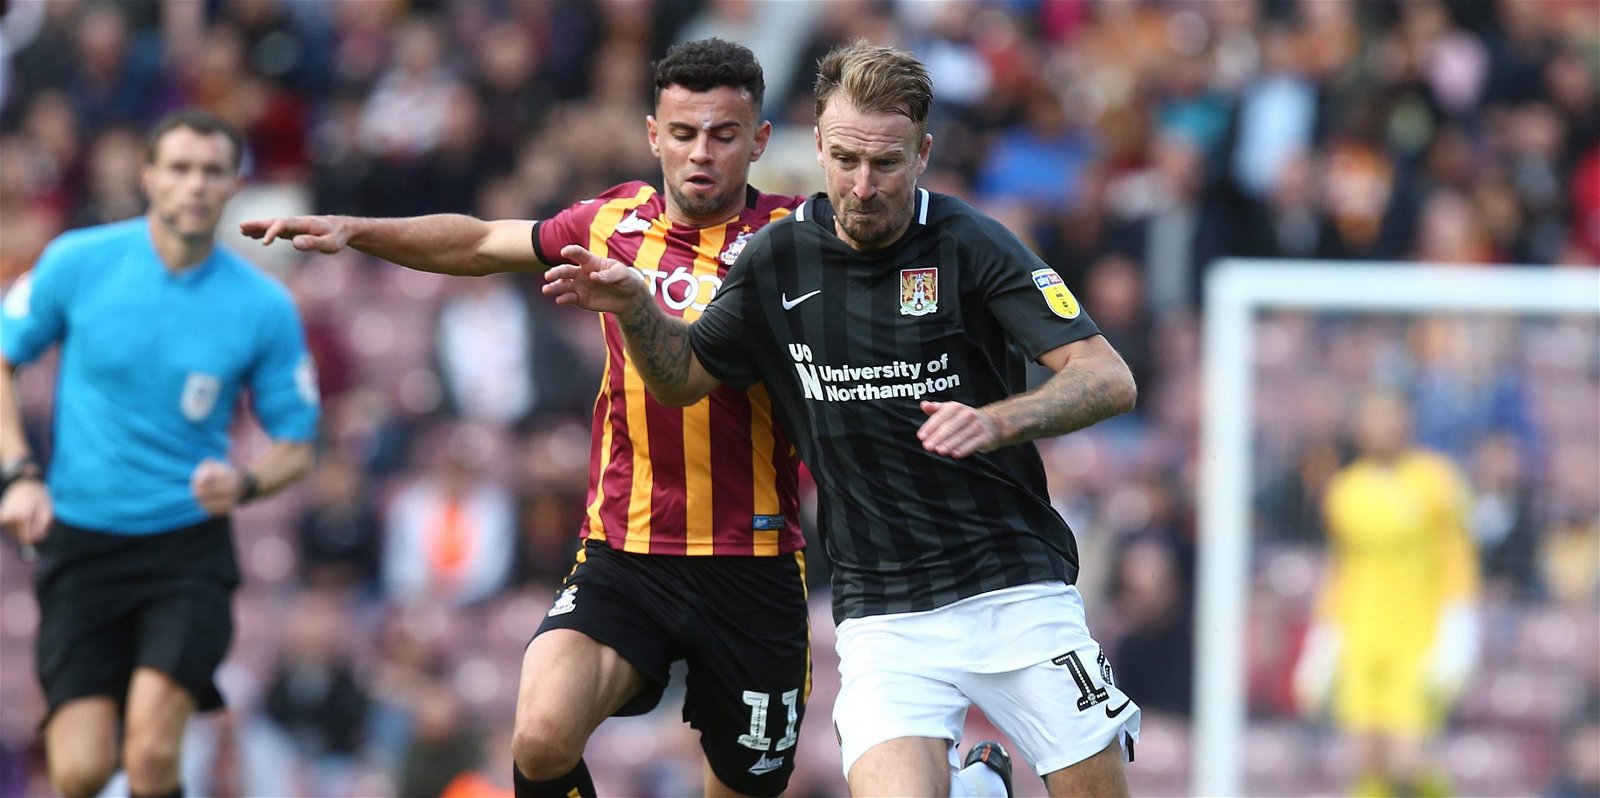 Bradford City Walsall Burton Albion, Bradford City expected to release winger this summer